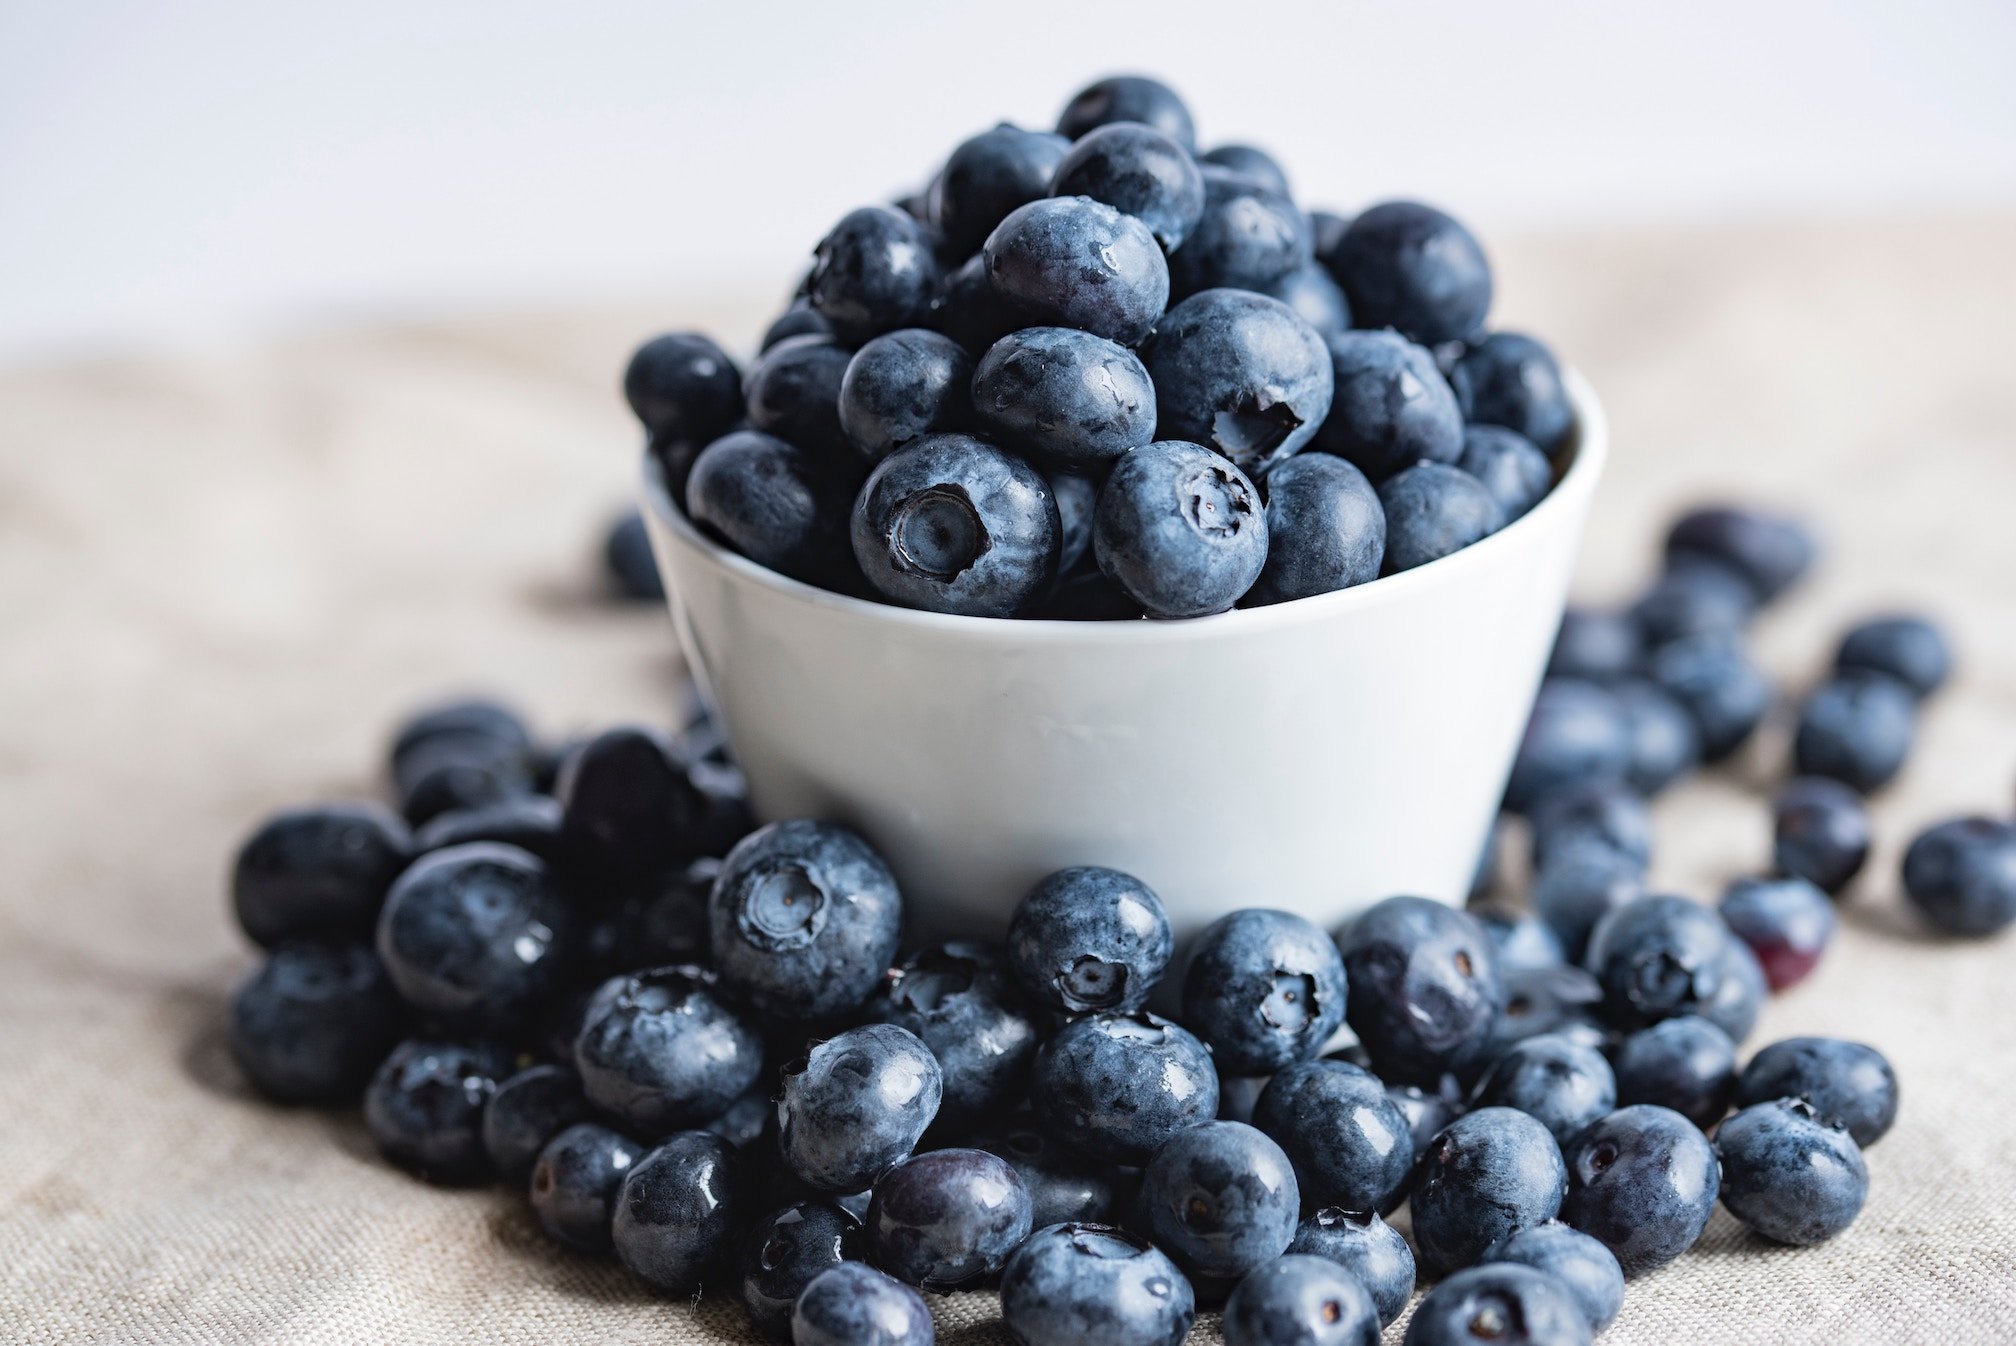 Boost your immune system - Blueberries